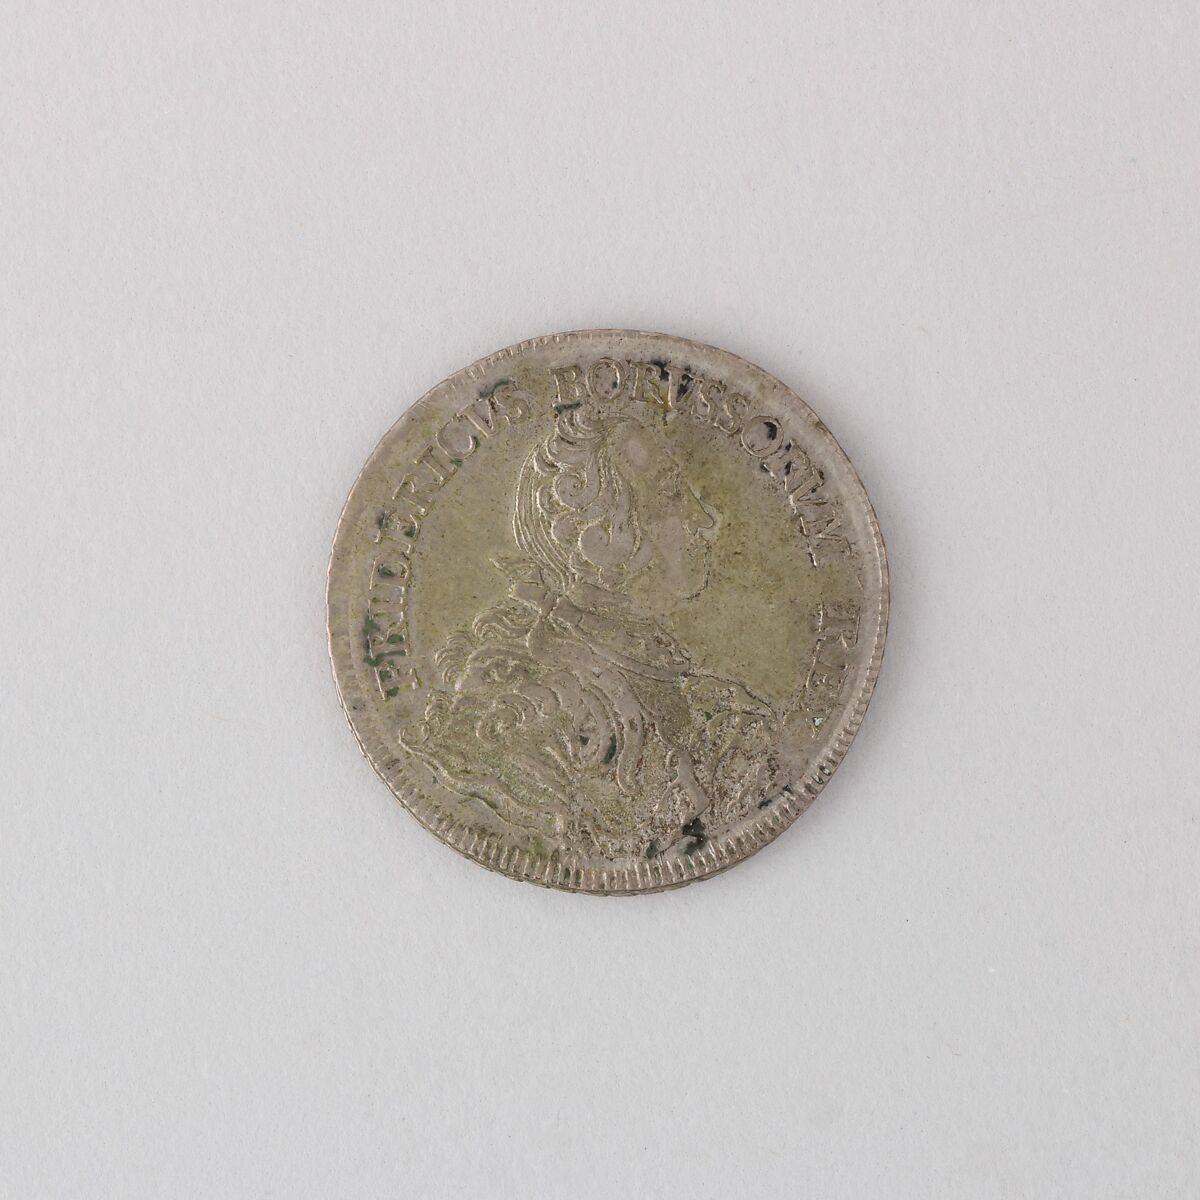 Coin (Thaler) Showing Frederick the Great, Silver, German 